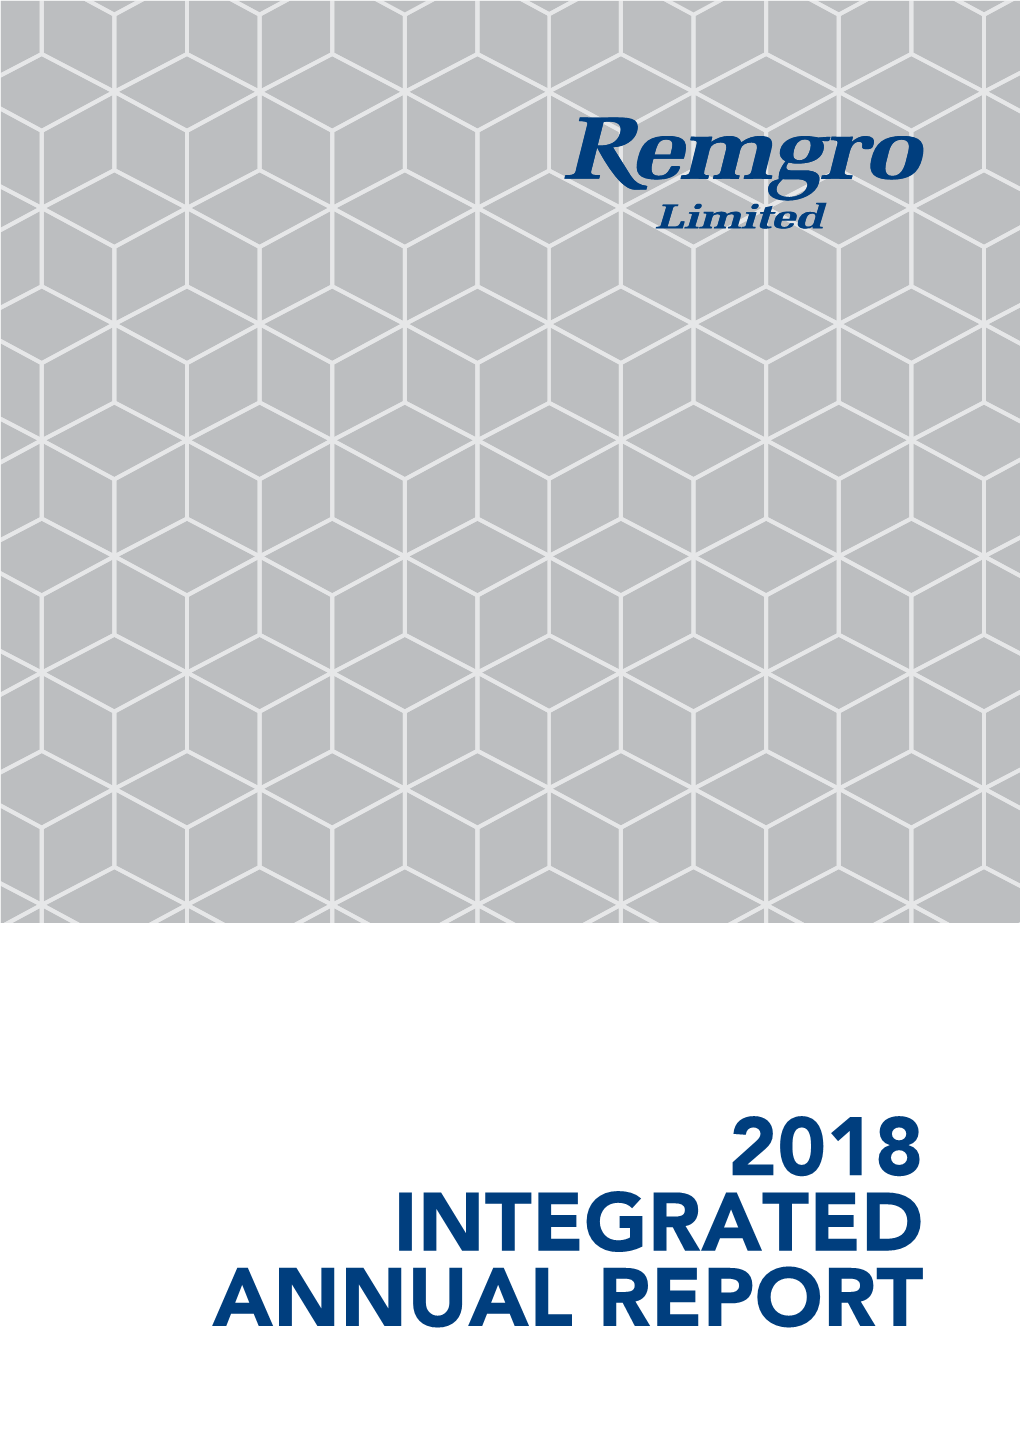 2018 INTEGRATED ANNUAL REPORT Worldreginfo - 6C2e058d-71D6-43A3-B5f5-A2785affeaa3 CREATING SHAREHOLDER VALUE SINCE 1948